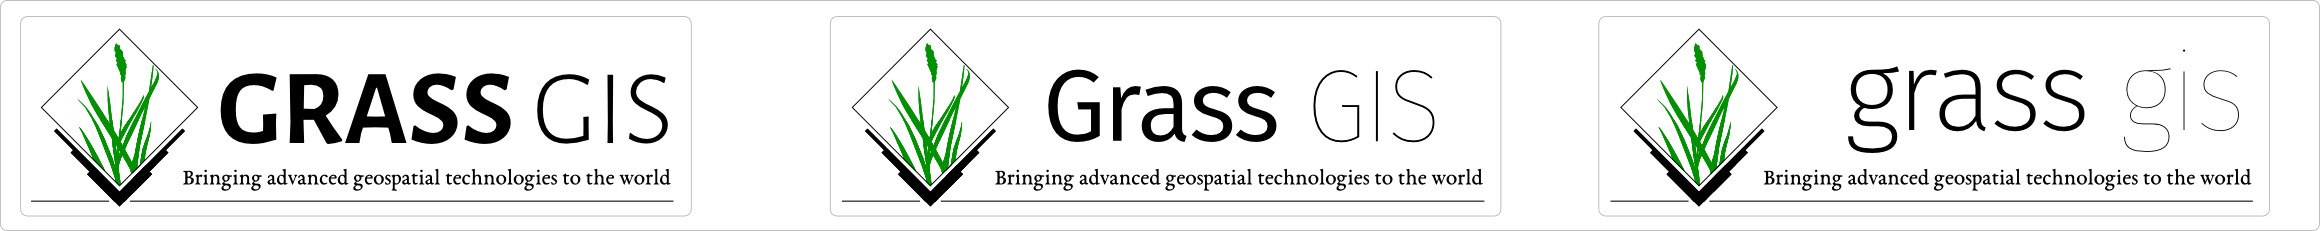 File:GRASSGIS welcome synthesis.jpg